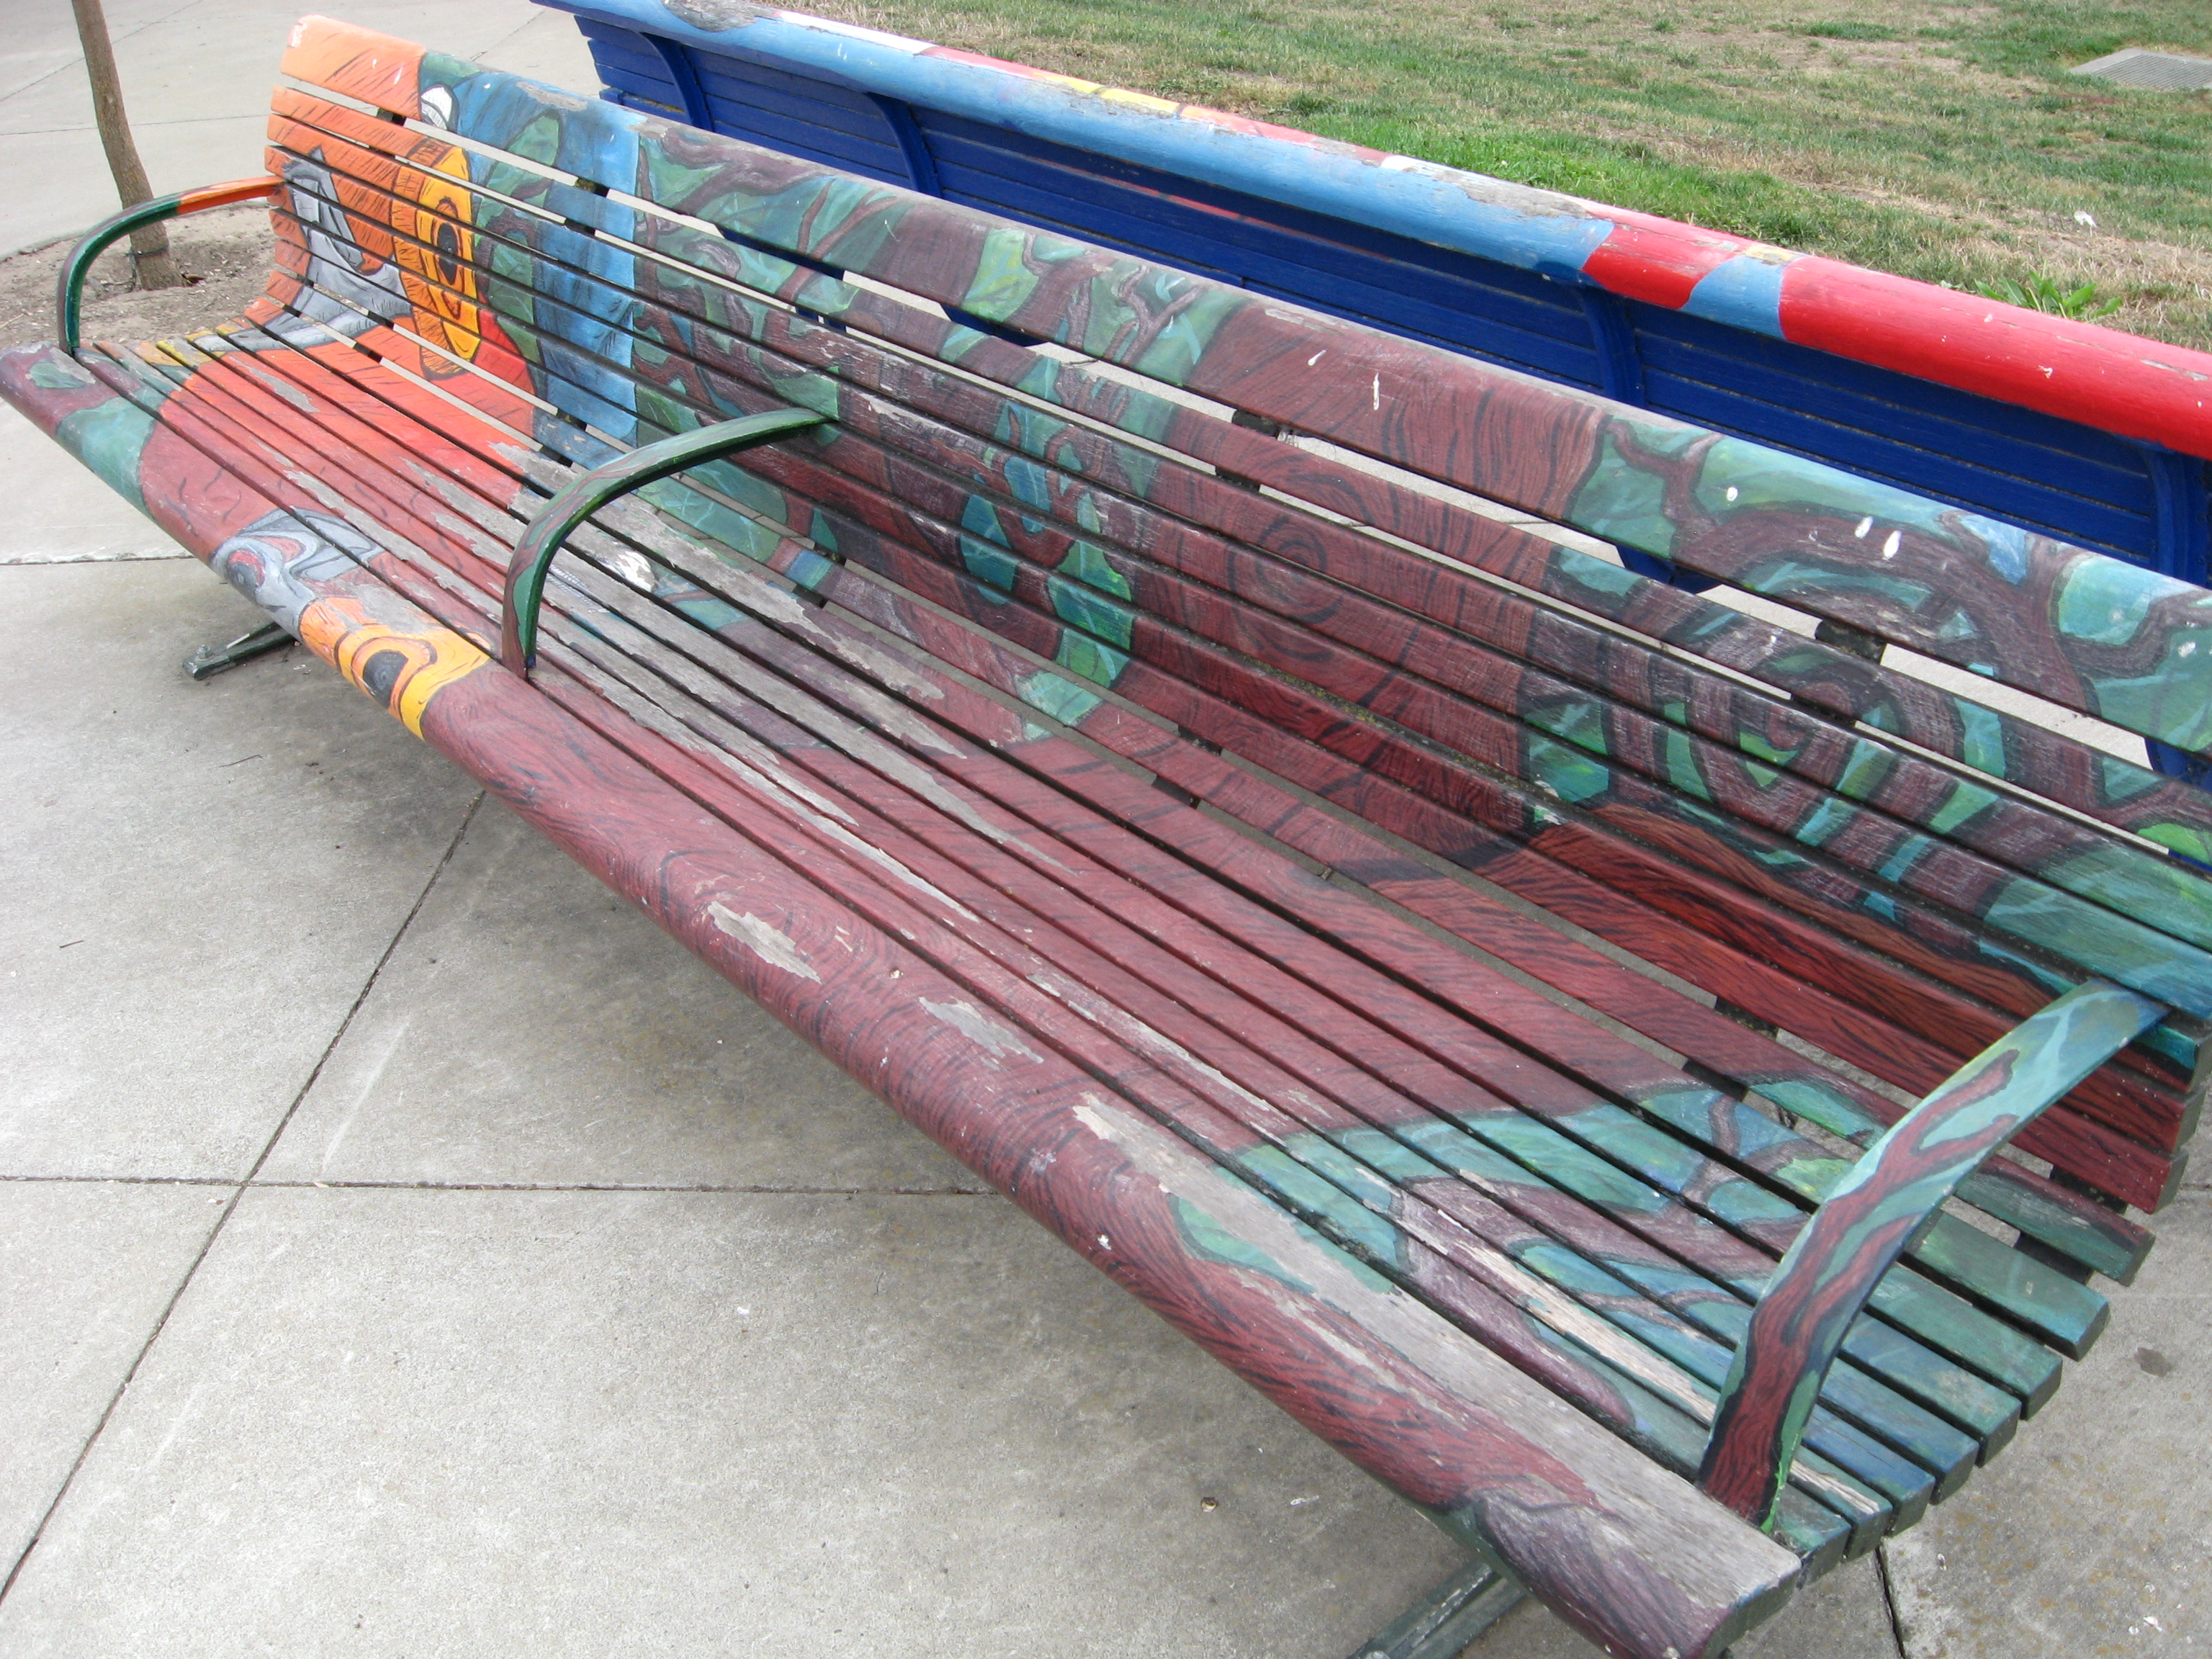 A Place to Play Art Bench